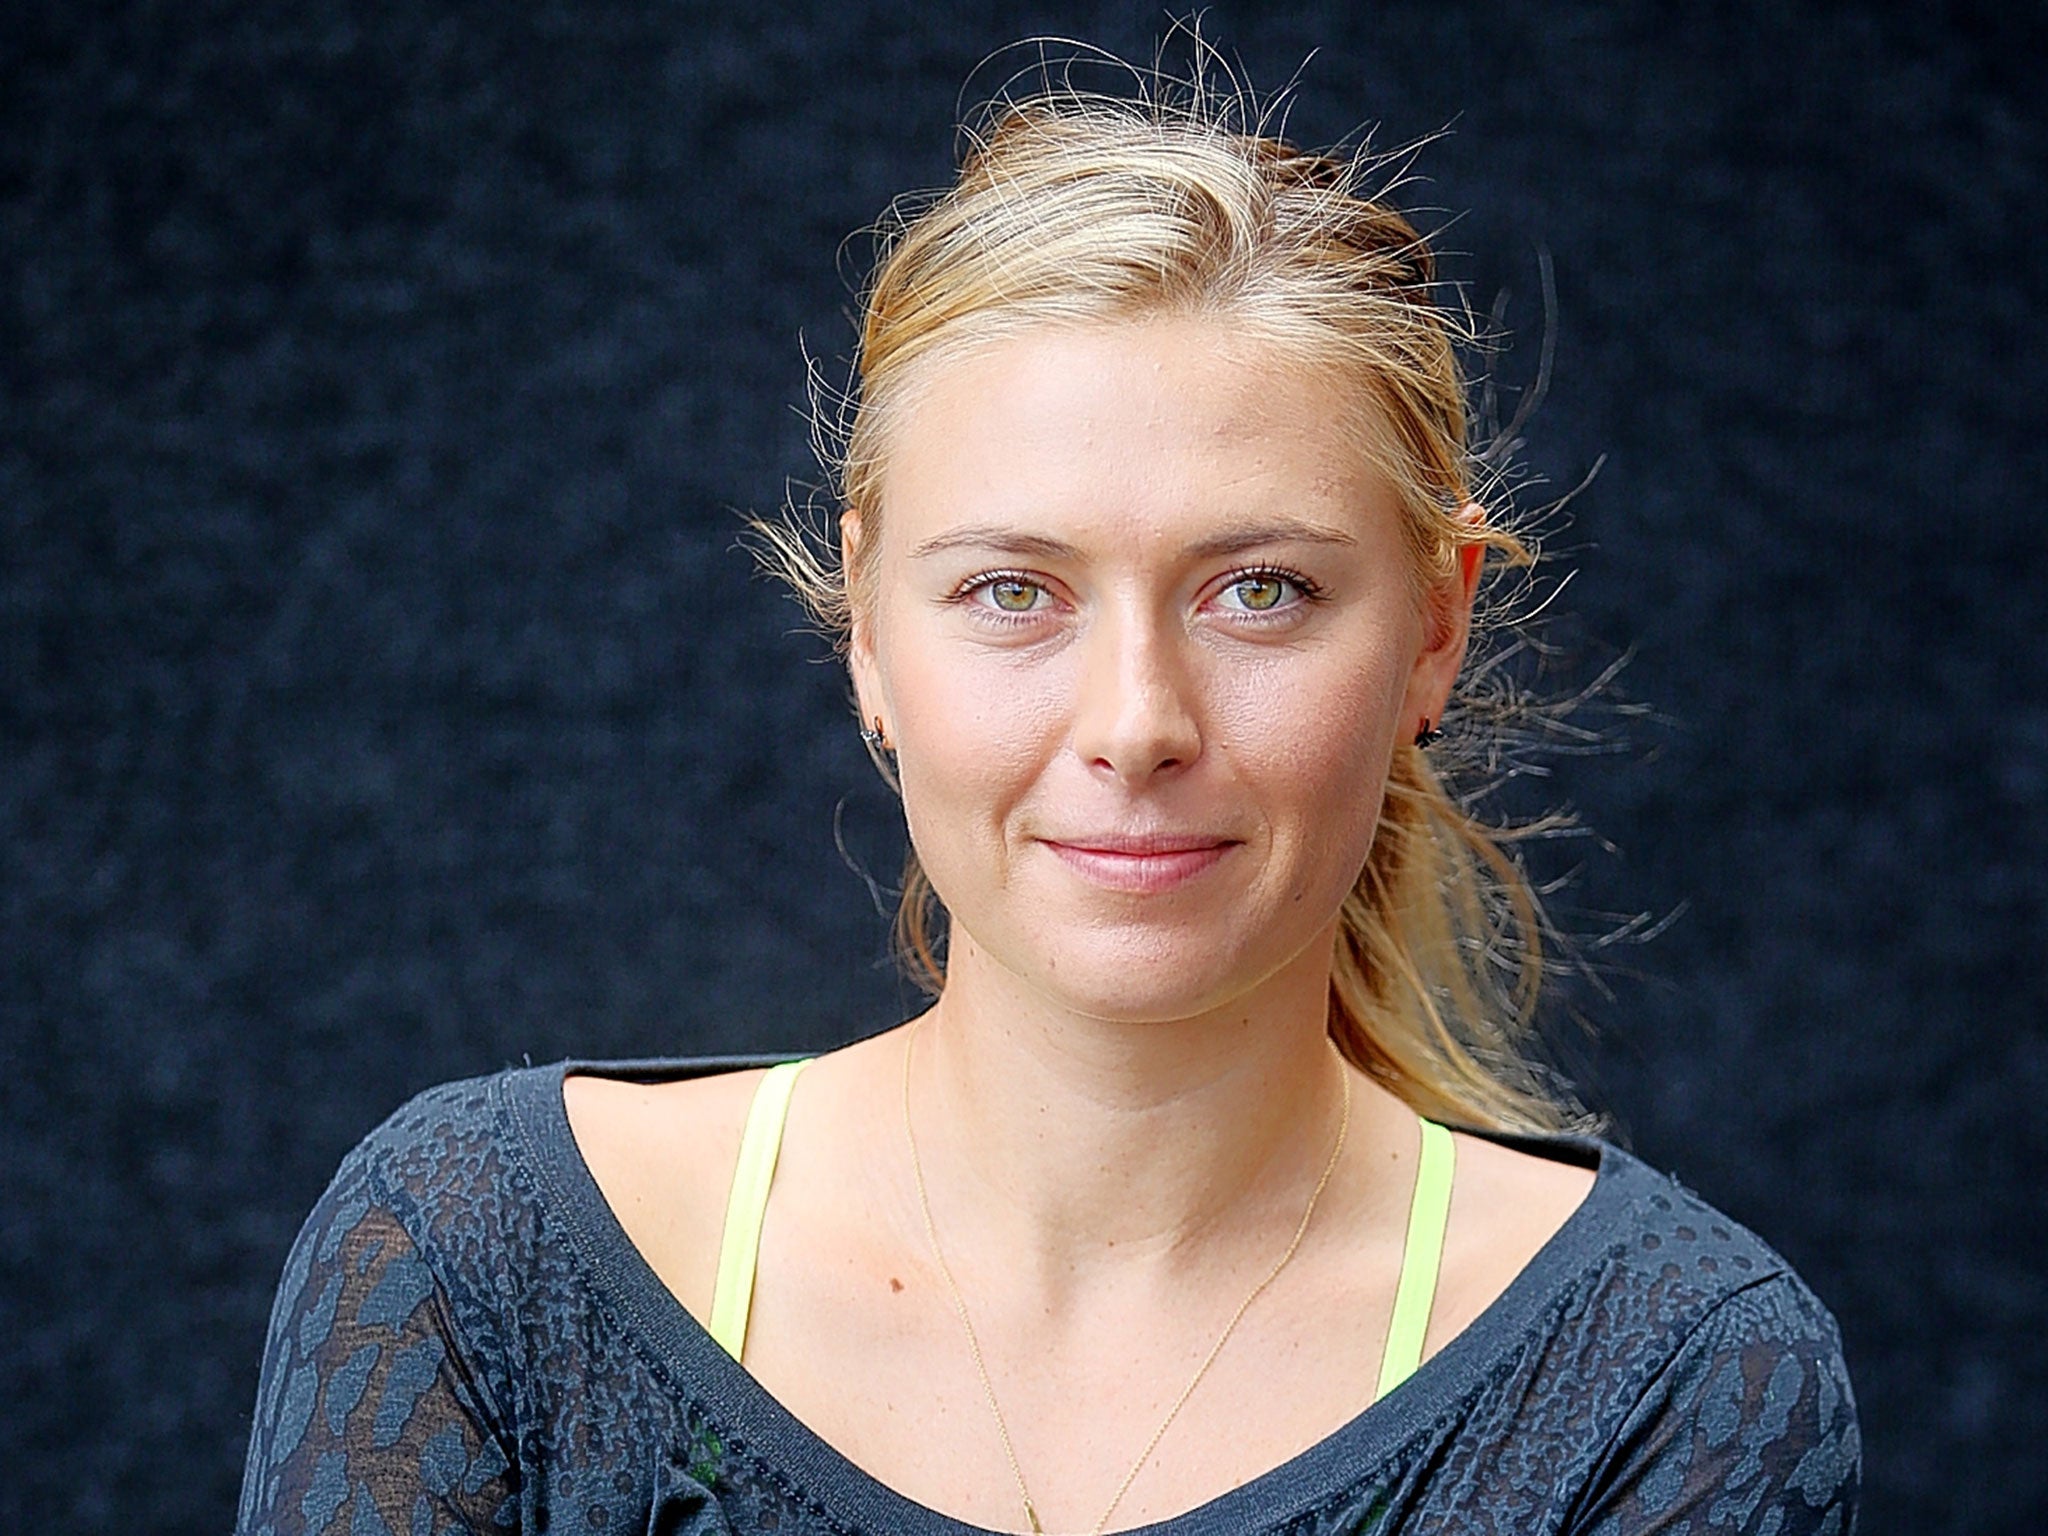 Maria Sharapova has only gone beyond the fourth round at Wimbledon once since 2006